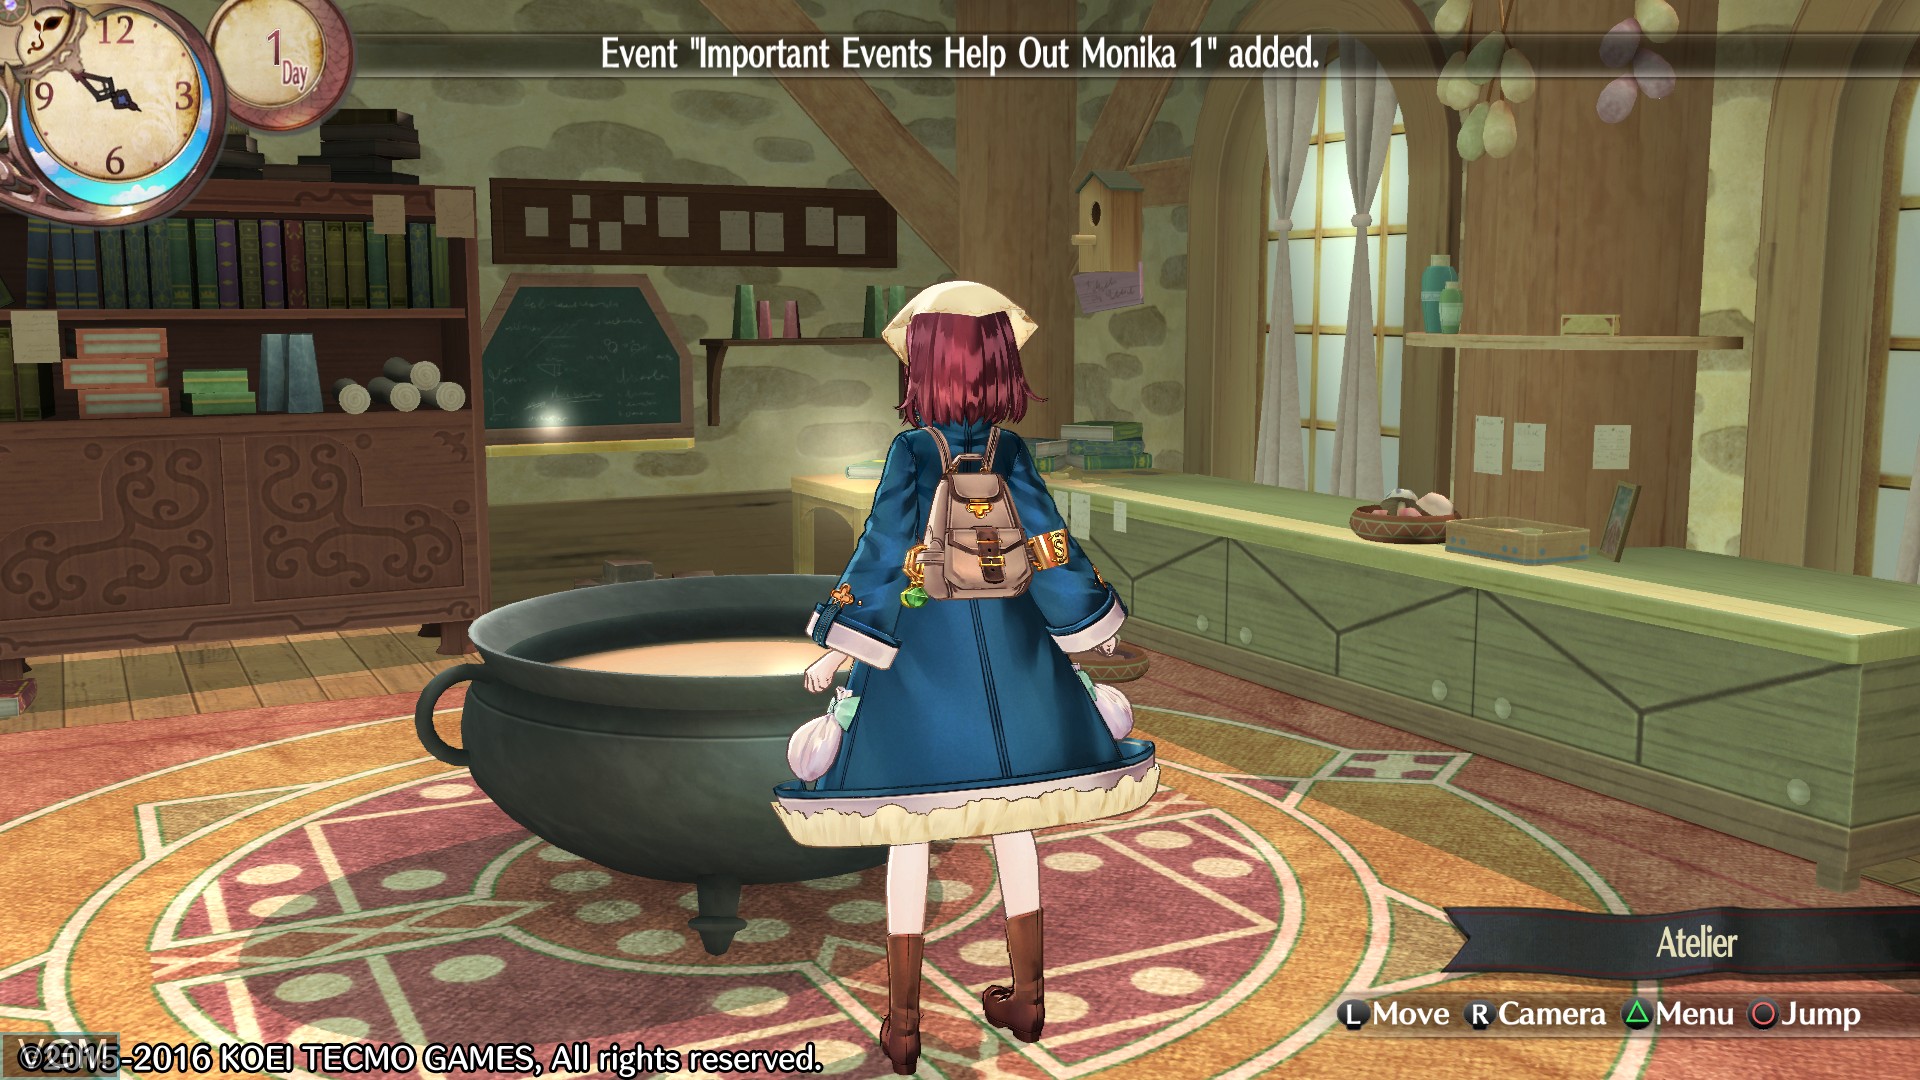 Atelier Sophie - The Alchemist of the Mysterious Book